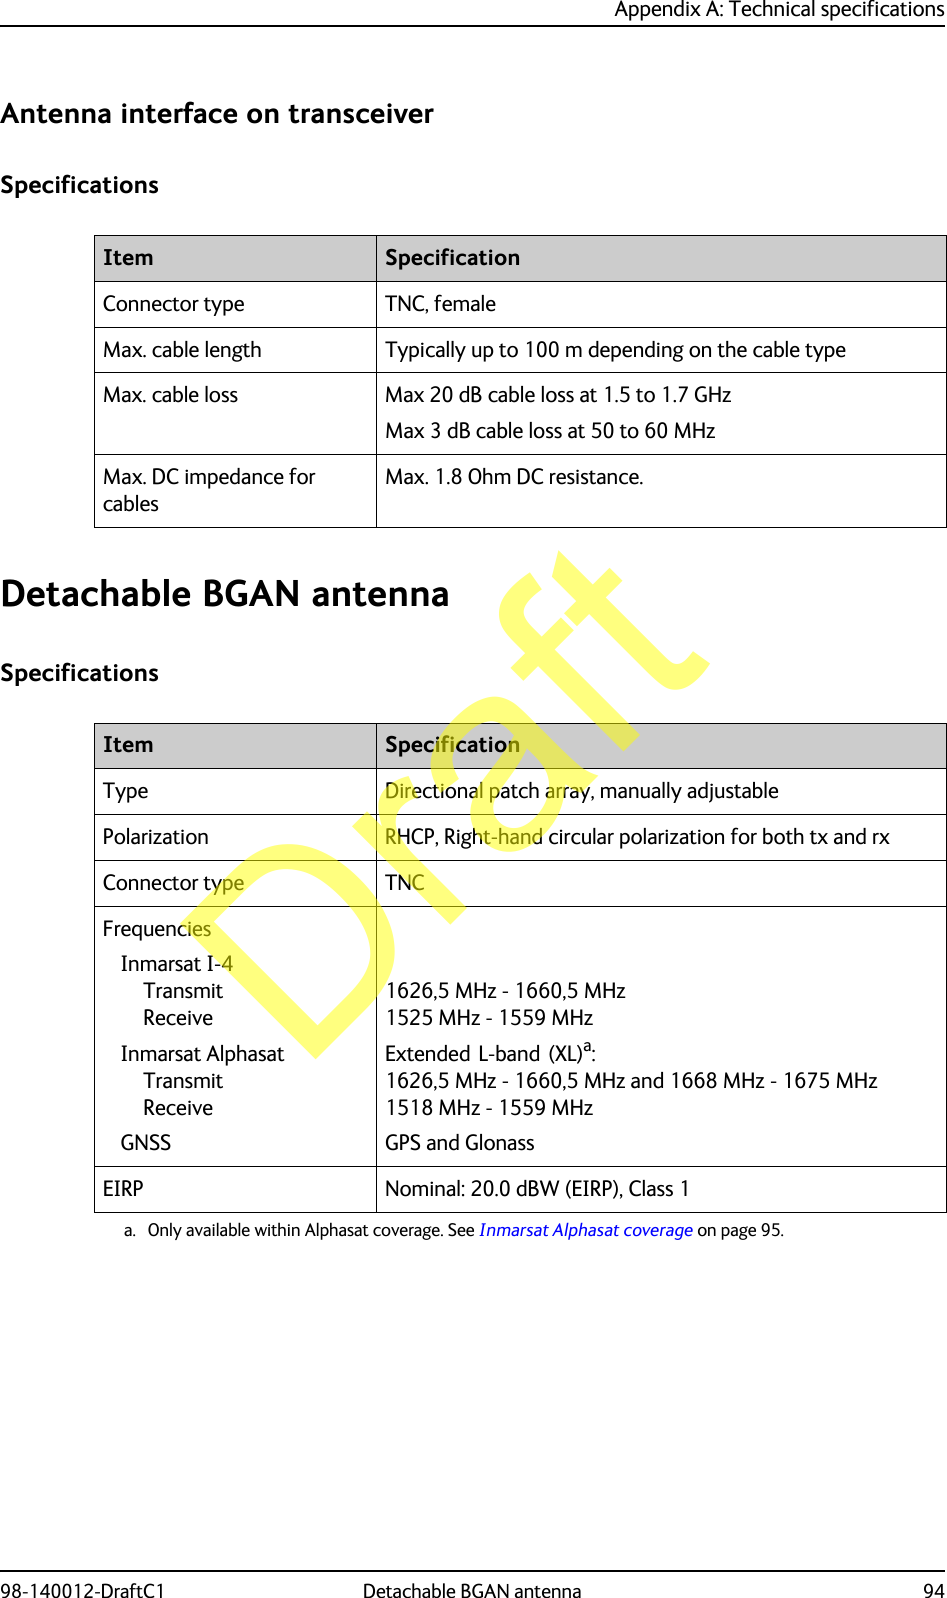 Appendix A: Technical specifications98-140012-DraftC1 Detachable BGAN antenna 94Antenna interface on transceiverSpecificationsDetachable BGAN antennaSpecificationsItem SpecificationConnector type TNC, femaleMax. cable length Typically up to 100 m depending on the cable typeMax. cable loss Max 20 dB cable loss at 1.5 to 1.7 GHzMax 3 dB cable loss at 50 to 60 MHzMax. DC impedance for cablesMax. 1.8 Ohm DC resistance.Item SpecificationType Directional patch array, manually adjustablePolarization RHCP, Right-hand circular polarization for both tx and rxConnector type TNCFrequenciesInmarsat I-4 Transmit ReceiveInmarsat Alphasat Transmit ReceiveGNSS1626,5 MHz - 1660,5 MHz 1525 MHz - 1559 MHzExtended L-band (XL)a:1626,5 MHz - 1660,5 MHz and 1668 MHz - 1675 MHz 1518 MHz - 1559 MHzGPS and Glonass a. Only available within Alphasat coverage. See Inmarsat Alphasat coverage on page 95.EIRP Nominal: 20.0 dBW (EIRP), Class 1Draft